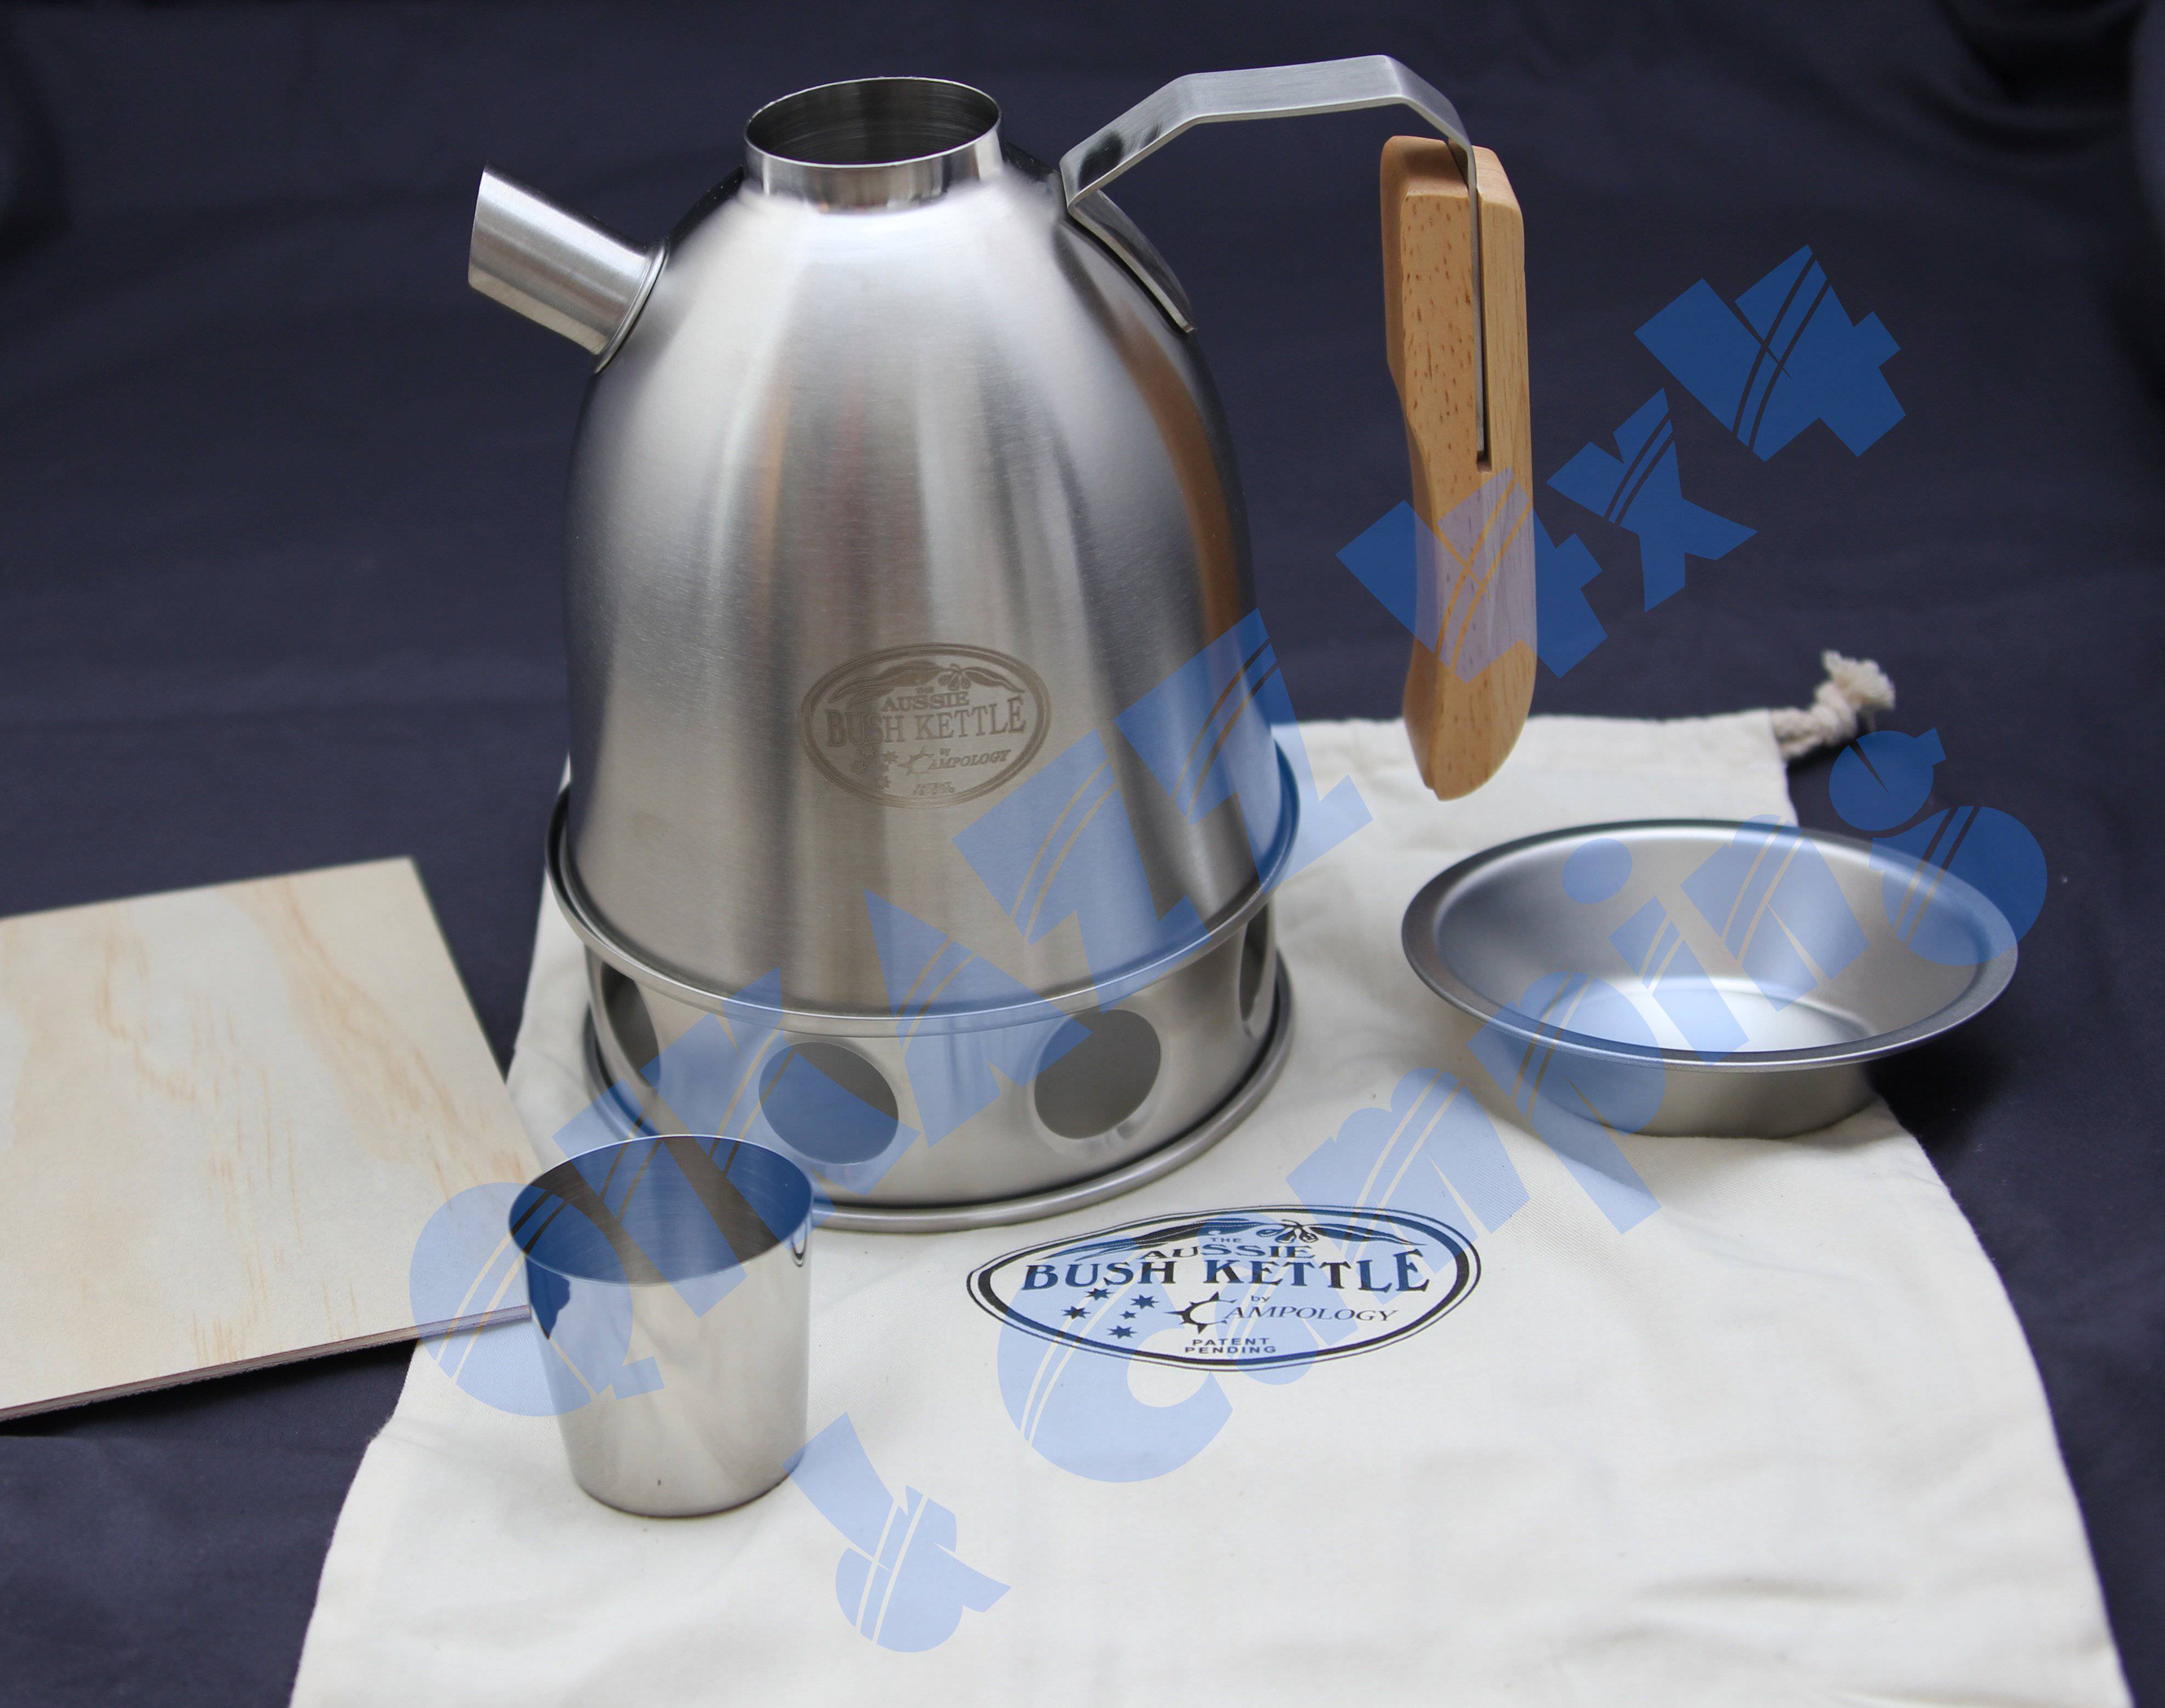 Aussie Bush Kettle by Campology - QIKAZZ Package | Campology